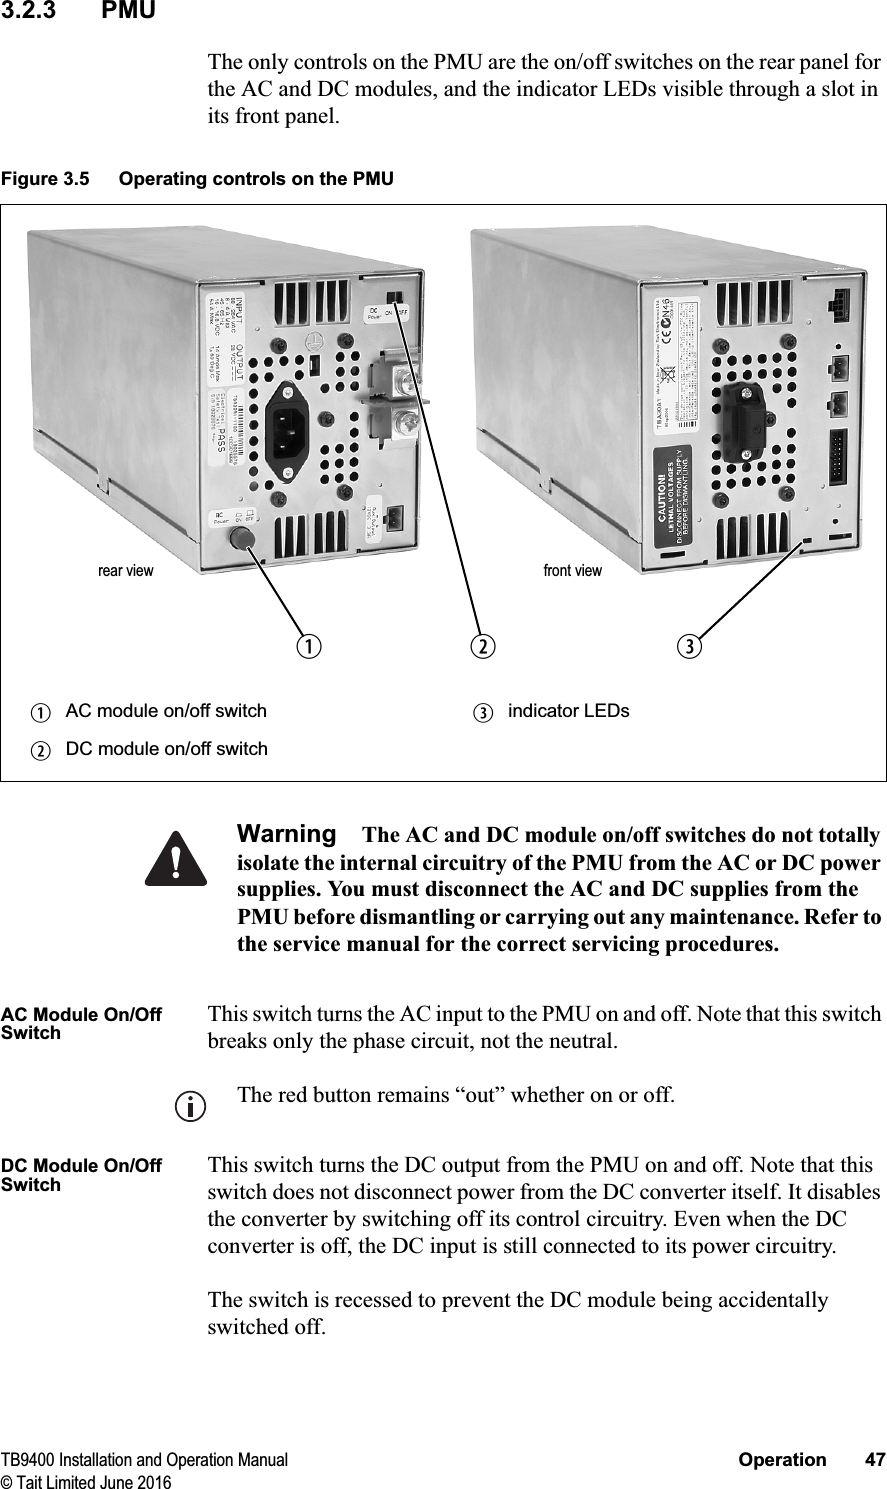 TB9400 Installation and Operation Manual Operation 47© Tait Limited June 20163.2.3 PMUThe only controls on the PMU are the on/off switches on the rear panel for the AC and DC modules, and the indicator LEDs visible through a slot in its front panel.Warning The AC and DC module on/off switches do not totally isolate the internal circuitry of the PMU from the AC or DC power supplies. You must disconnect the AC and DC supplies from the PMU before dismantling or carrying out any maintenance. Refer to the service manual for the correct servicing procedures.AC Module On/Off SwitchThis switch turns the AC input to the PMU on and off. Note that this switch breaks only the phase circuit, not the neutral.The red button remains “out” whether on or off.DC Module On/Off SwitchThis switch turns the DC output from the PMU on and off. Note that this switch does not disconnect power from the DC converter itself. It disables the converter by switching off its control circuitry. Even when the DC converter is off, the DC input is still connected to its power circuitry. The switch is recessed to prevent the DC module being accidentally switched off. Figure 3.5 Operating controls on the PMUbAC module on/off switch dindicator LEDscDC module on/off switchbcrear viewdfront view